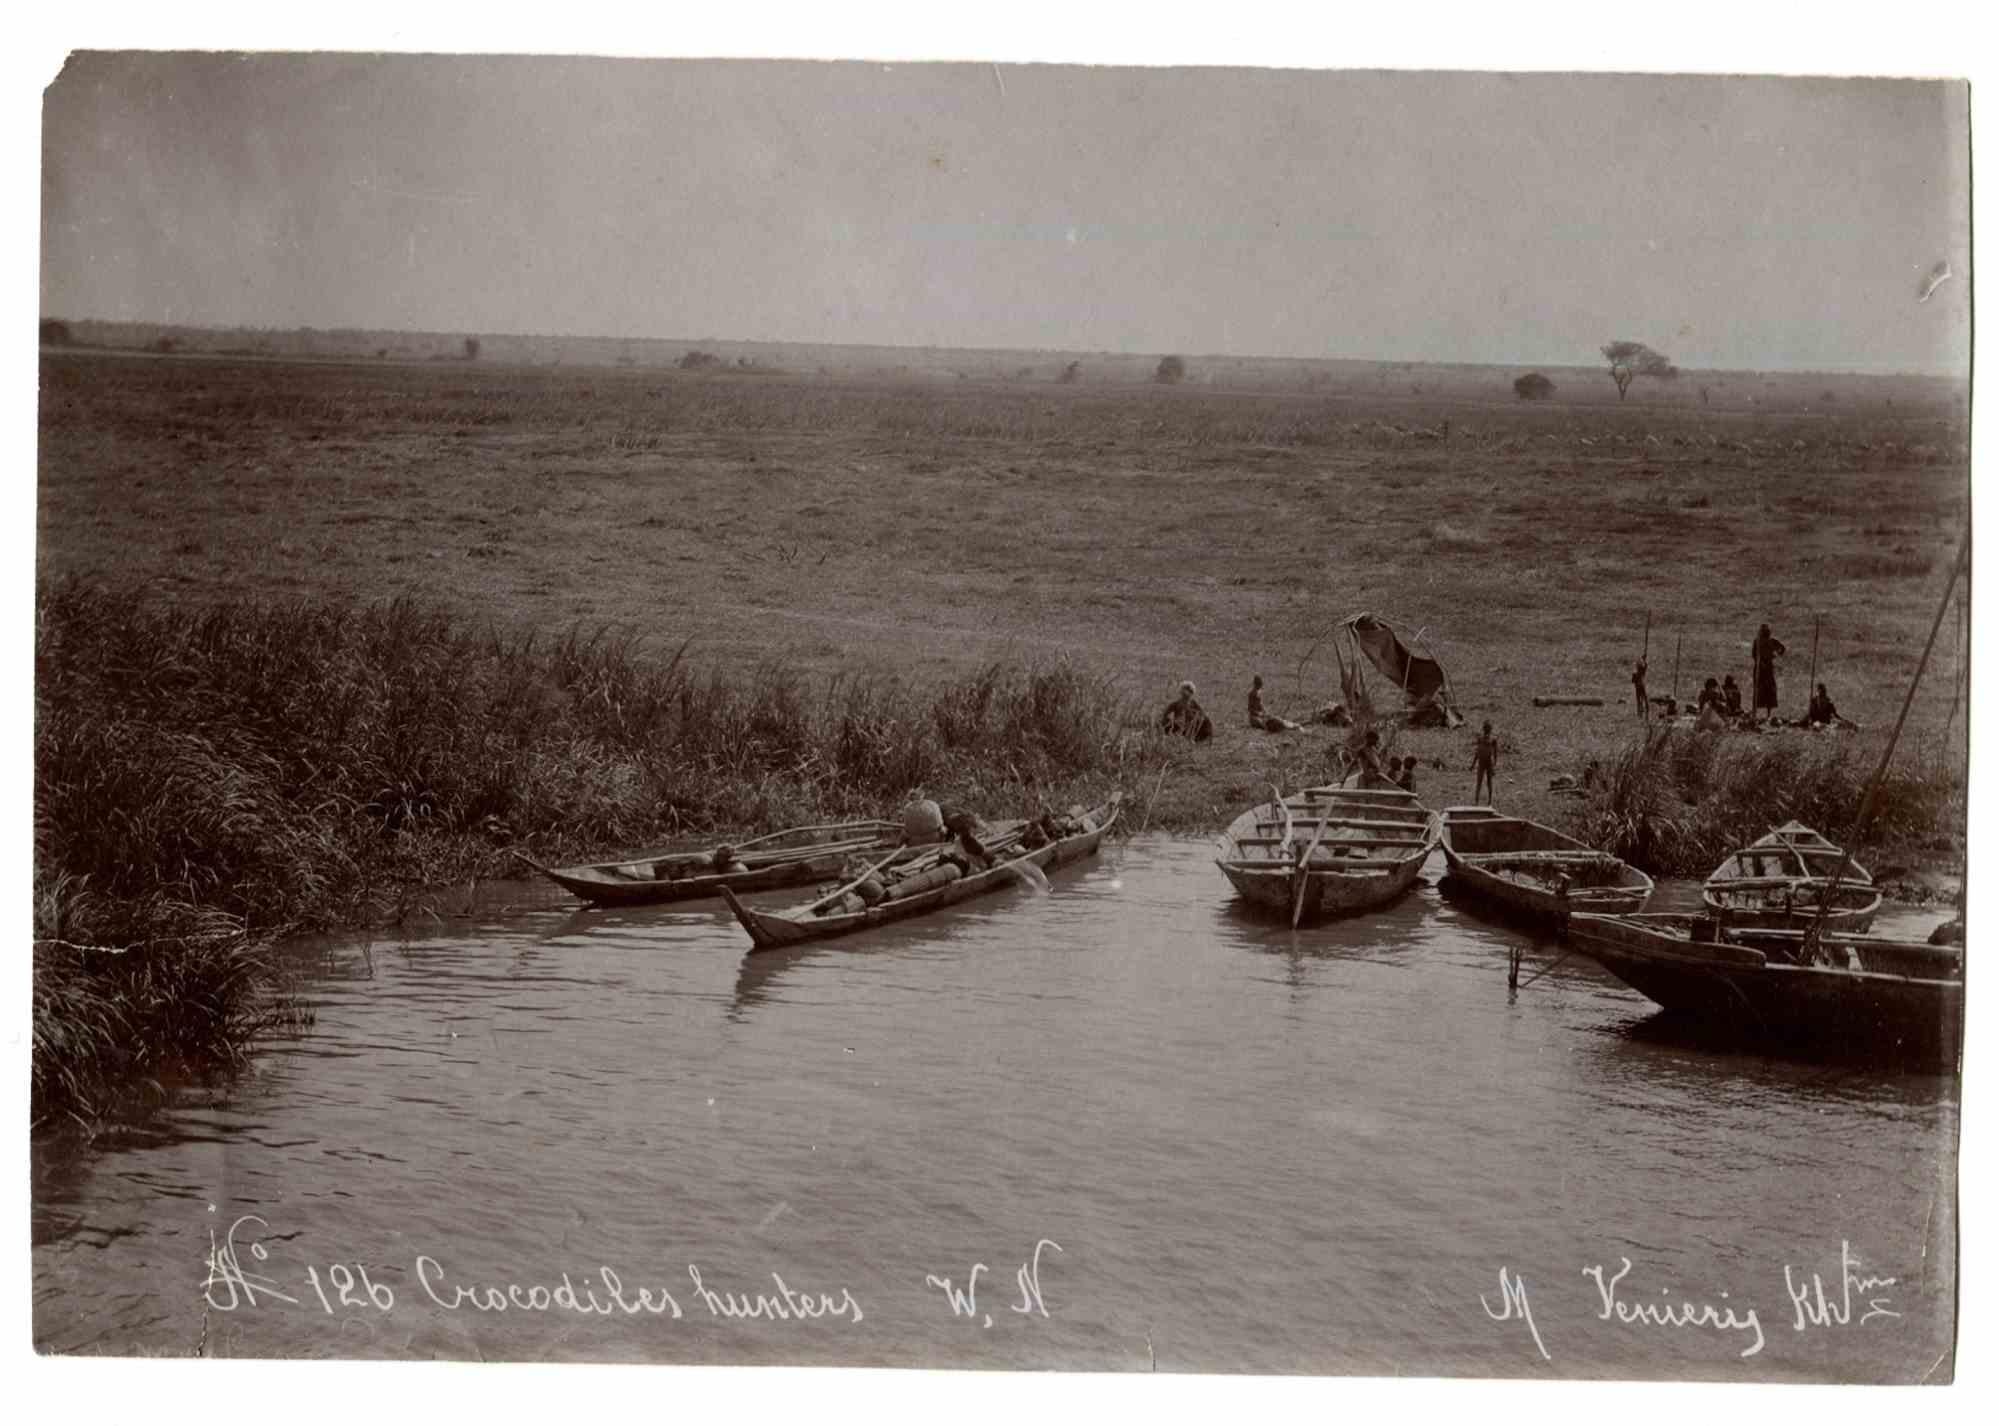 Crocodile Hunters in Africa - Vintage Photo - Early 20th Century